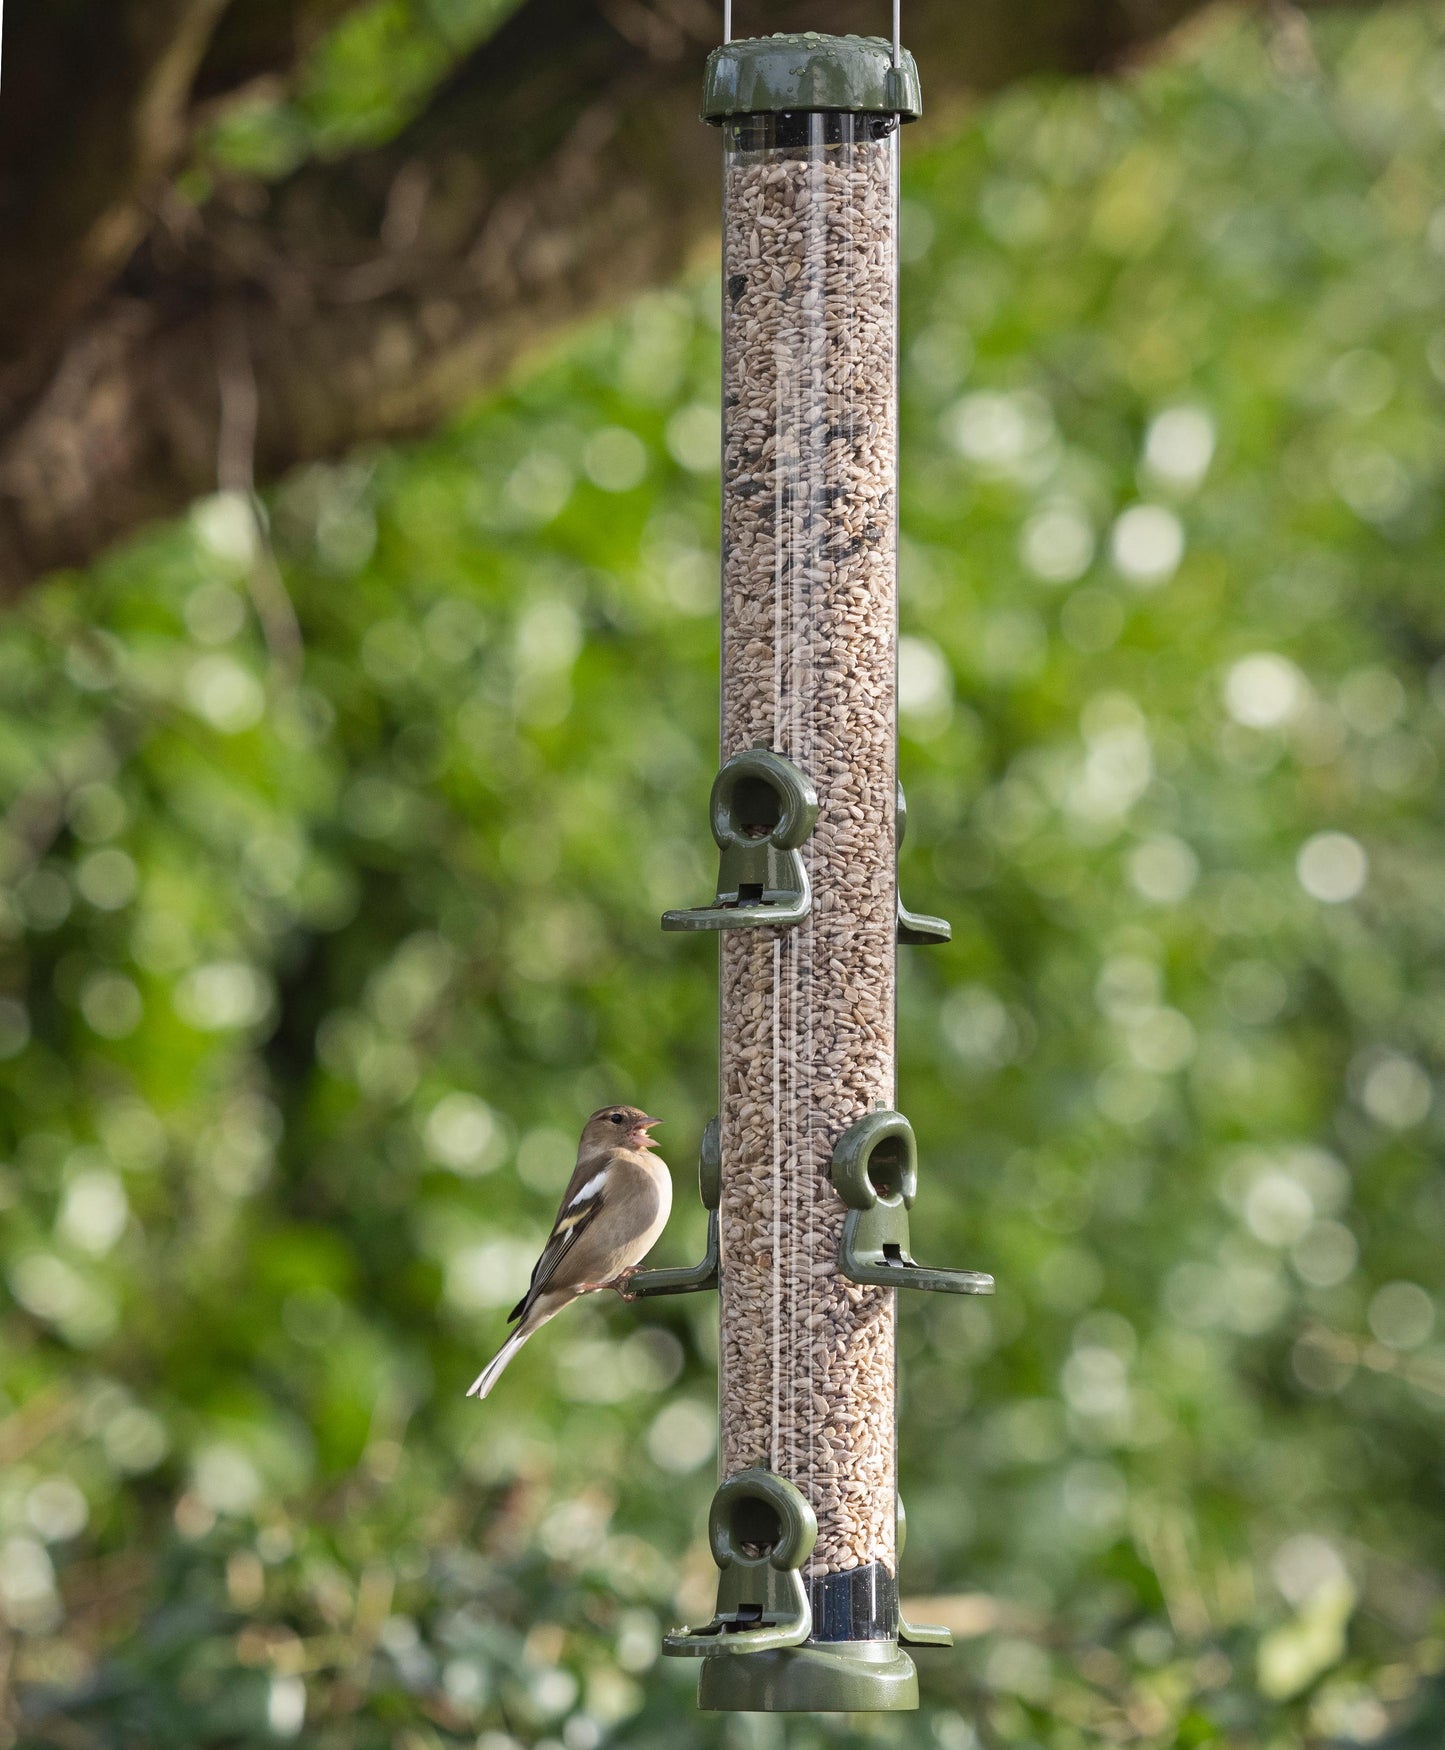 Ring-Pull Click™ Seed Feeder